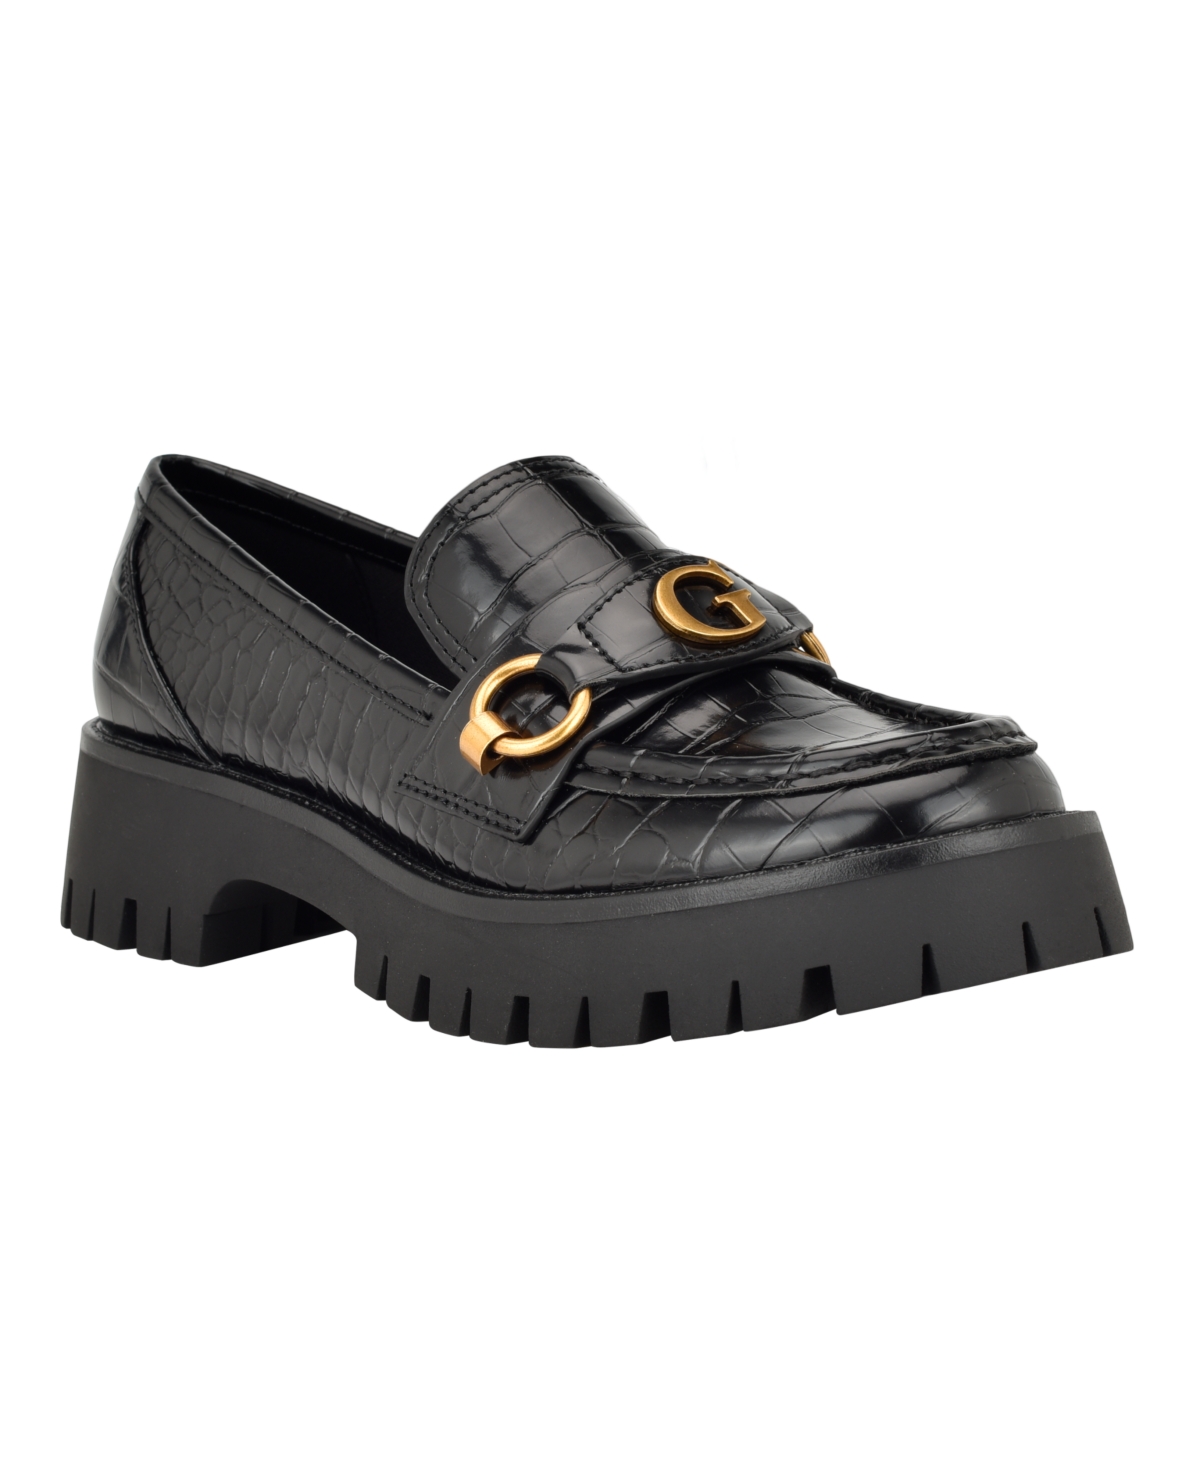 GUESS WOMEN'S ALMOST SLIP-ON LUG SOLE ROUND TOE BIT LOAFER